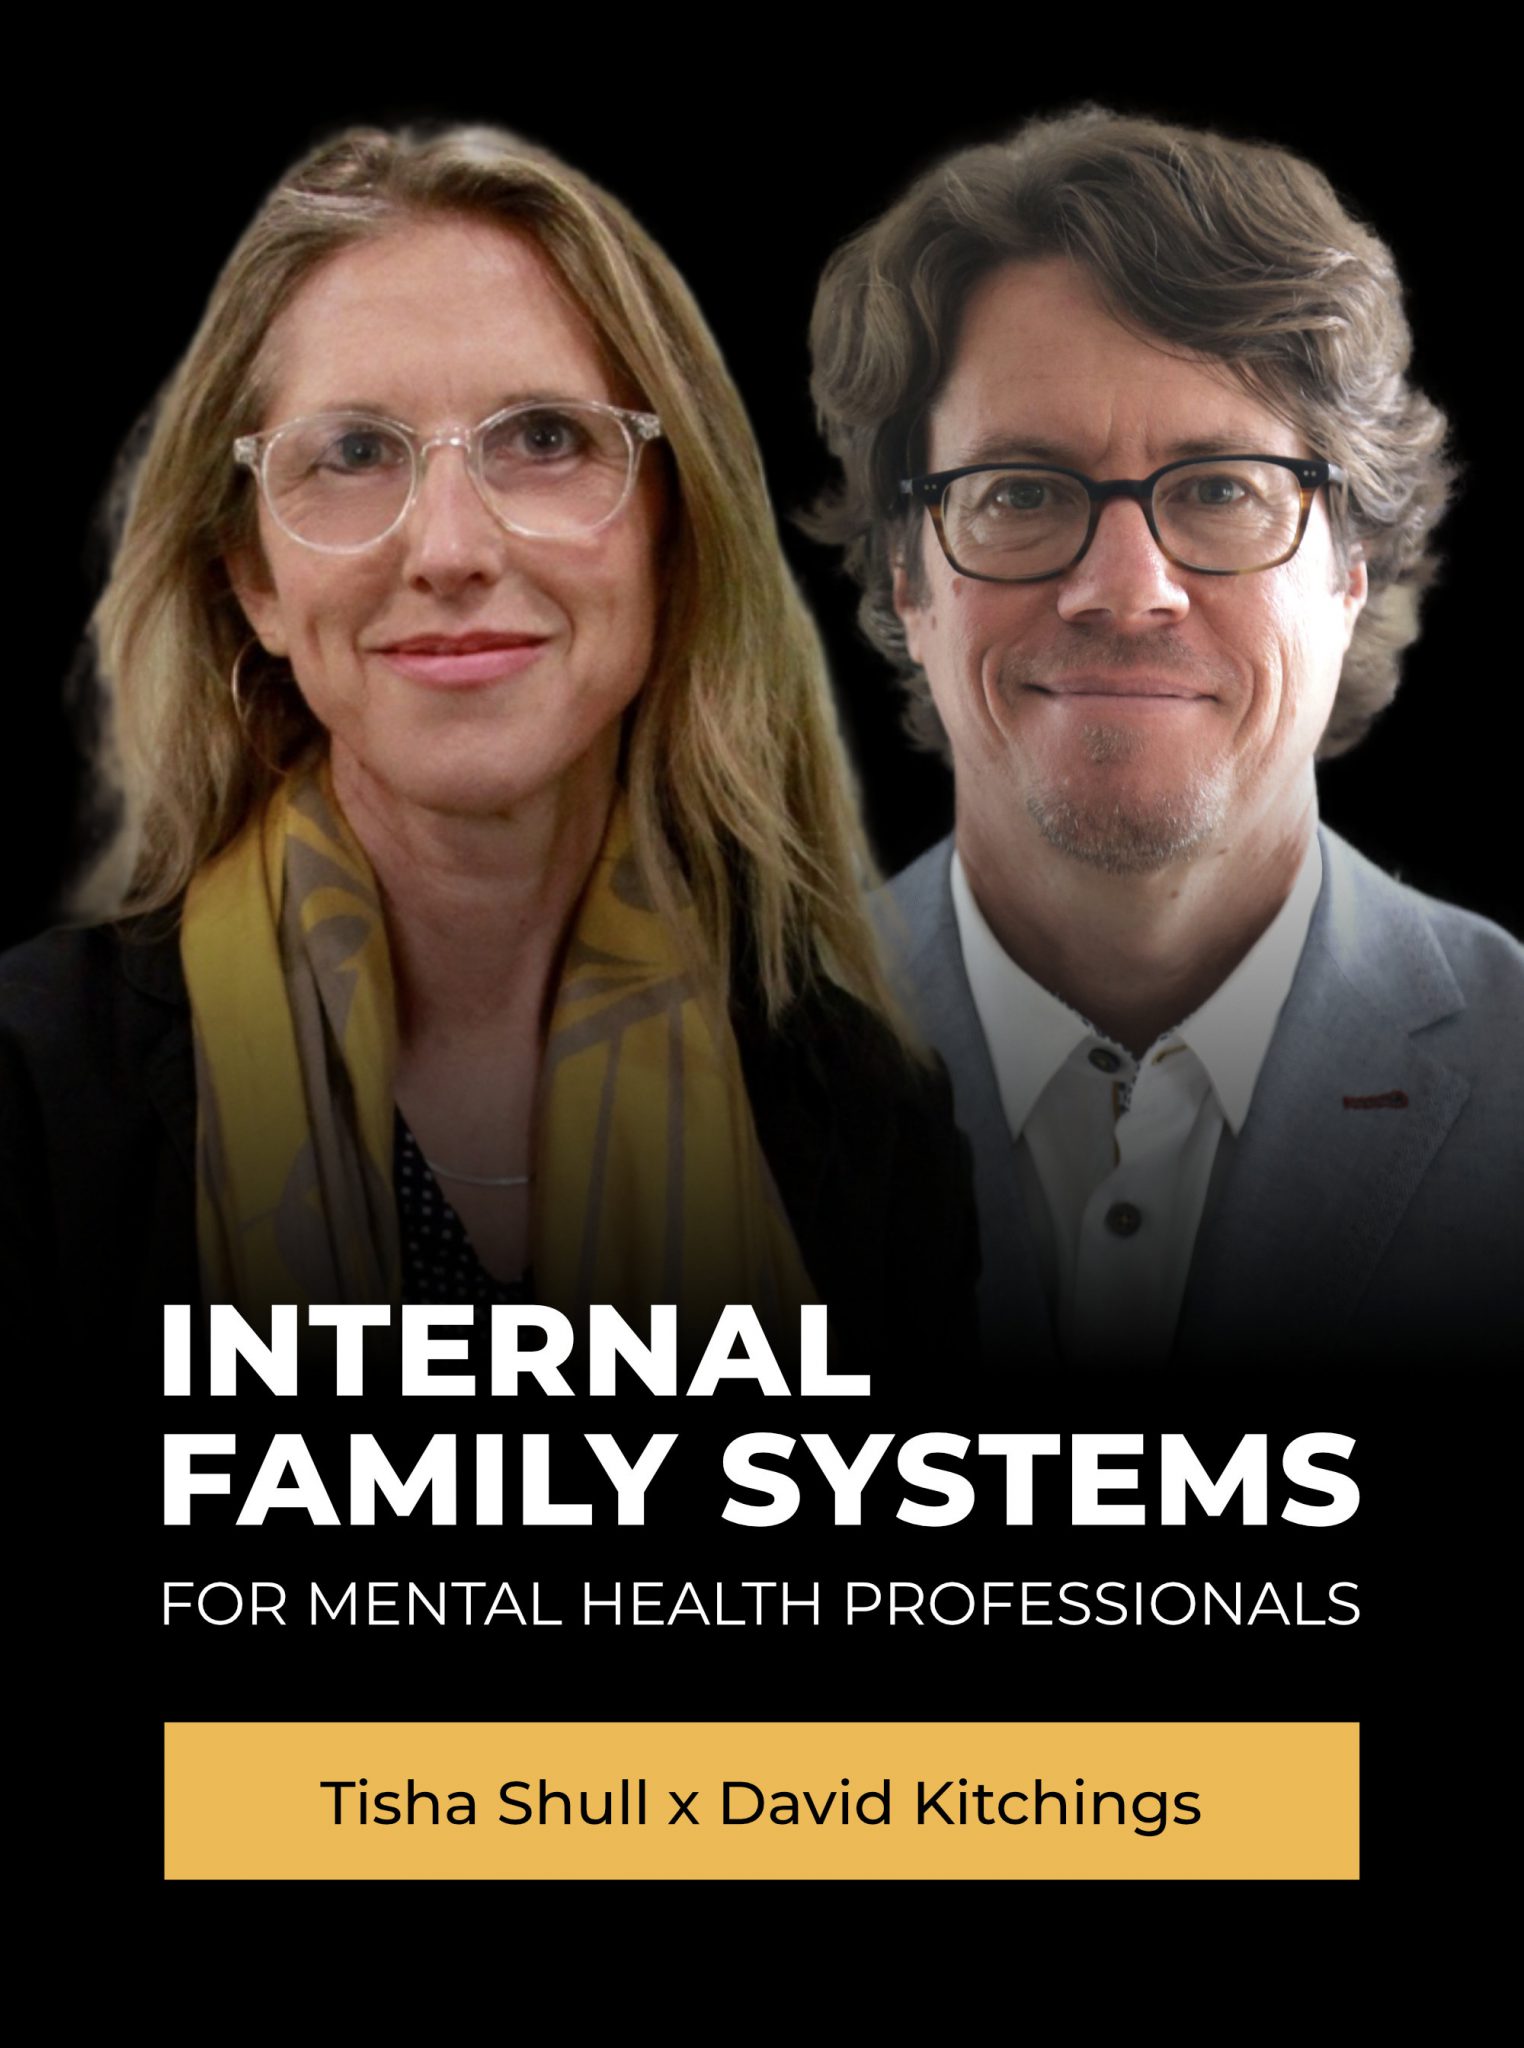 Internal Family Systems for mental health professionals 05.2022